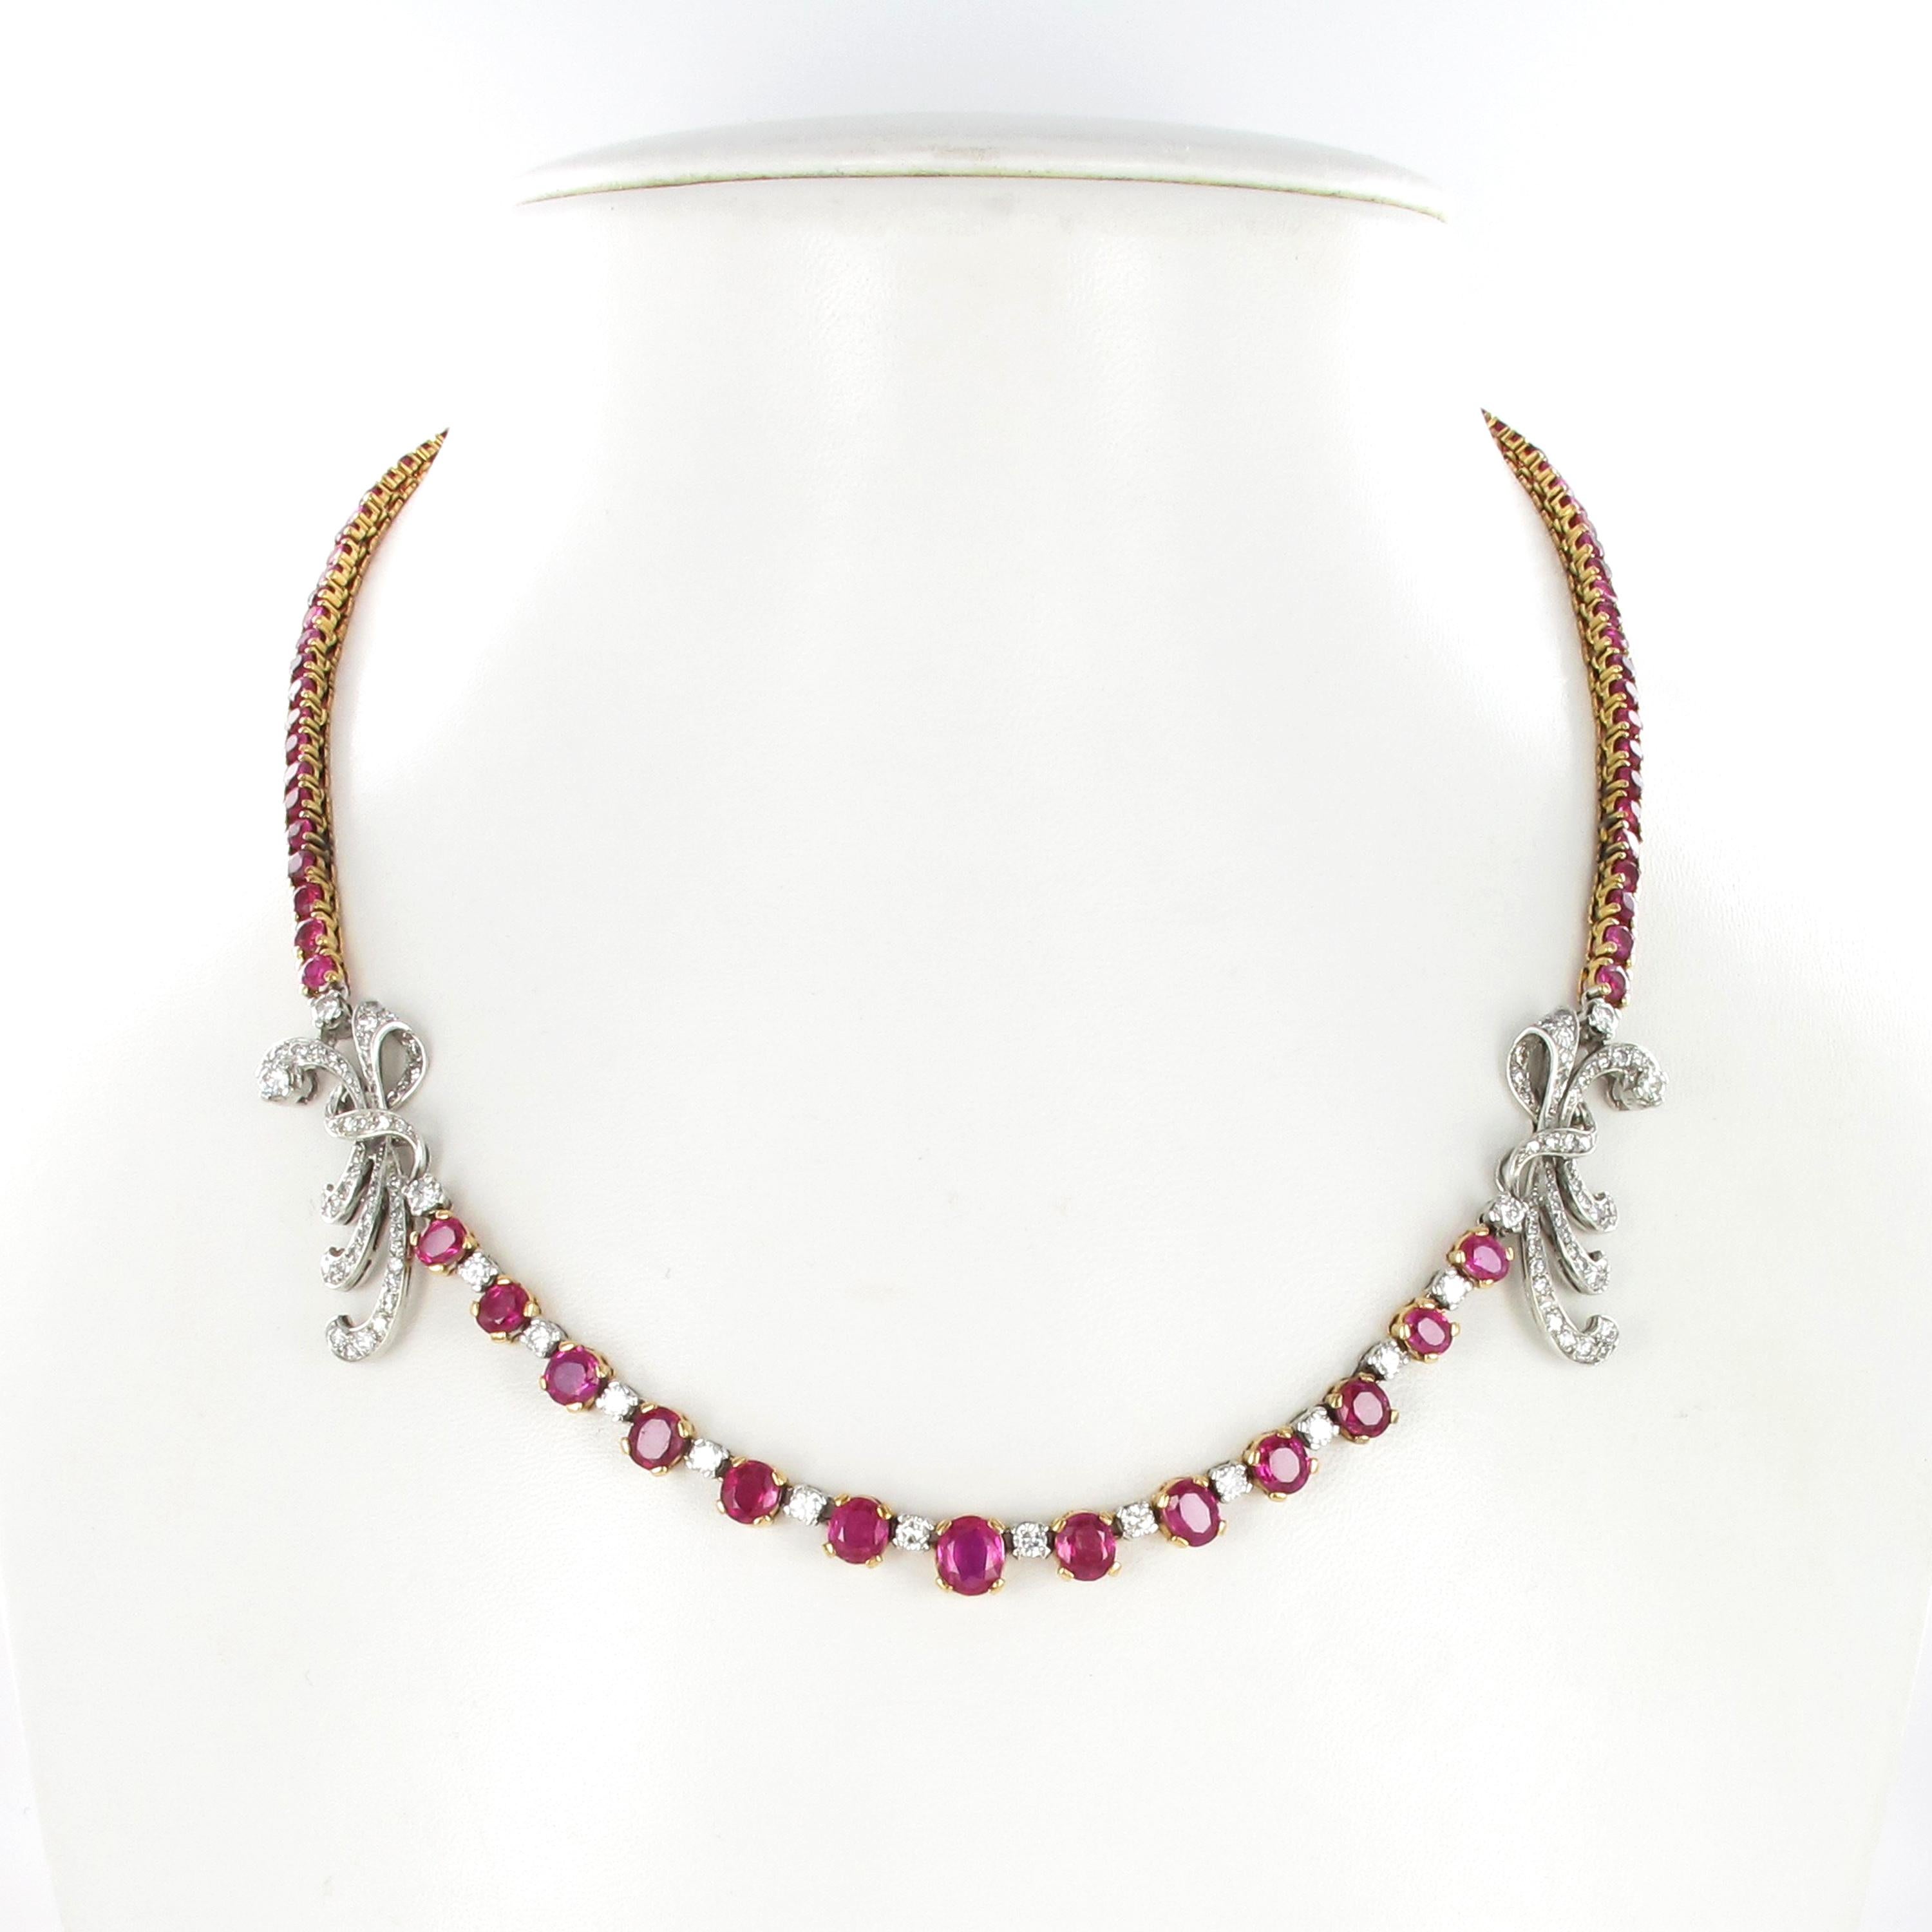 This exceptional necklace in 18 karat gold and platinum 950 is set with 91 untreated round and oval shaped Burma rubies of vivid pink-red colour, total weight approximately 15.00 carats.
The front is alternately set with 14 brilliant-cut diamonds,